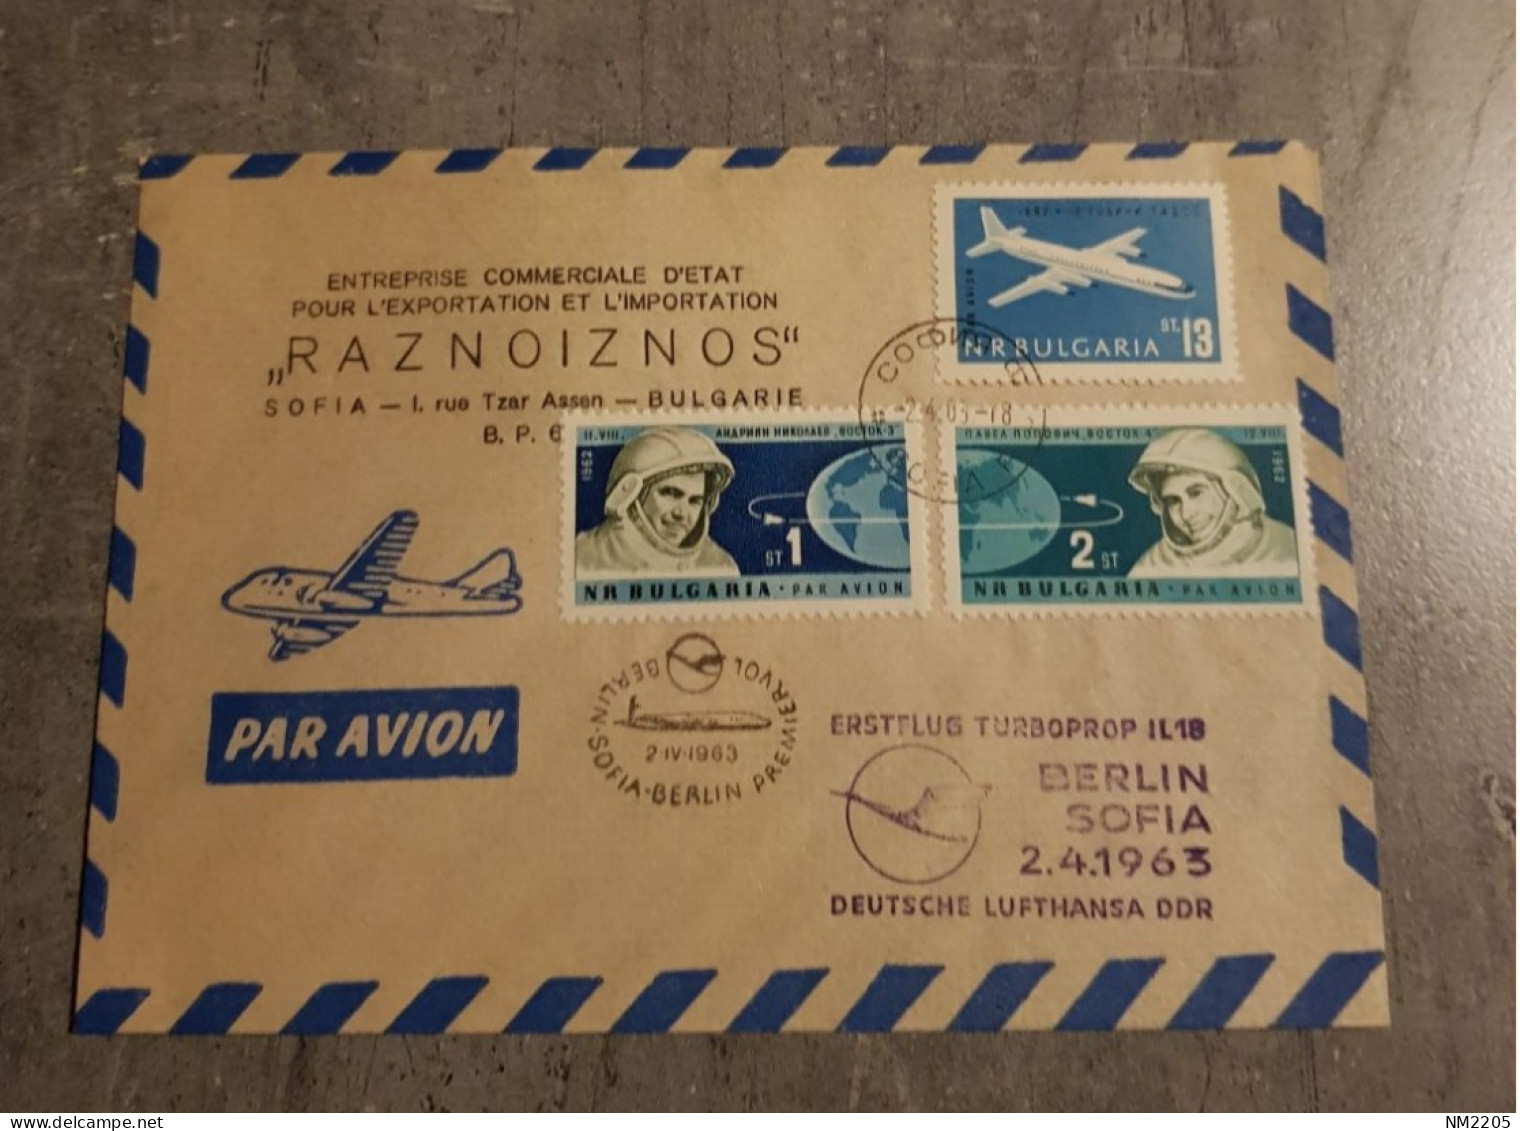 BULGARIA PAR AVION SPECIAL COVER "RAZNOIZNOS" SPACE-AVIATION CIRCULED WITH SPECIAL CANCELLED - Luchtpost